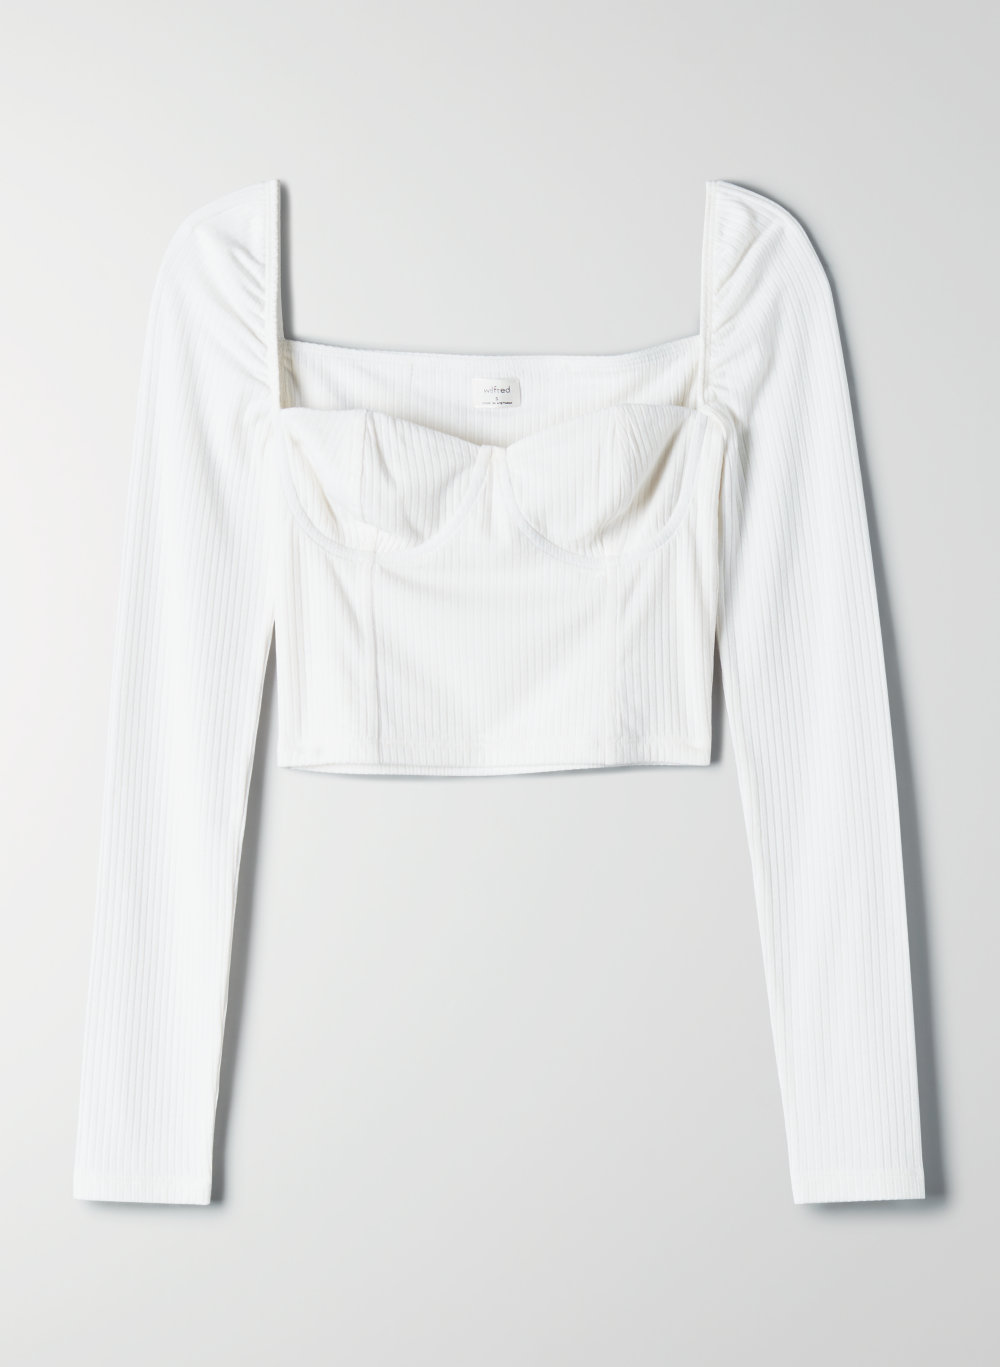 white bustier top with sleeves